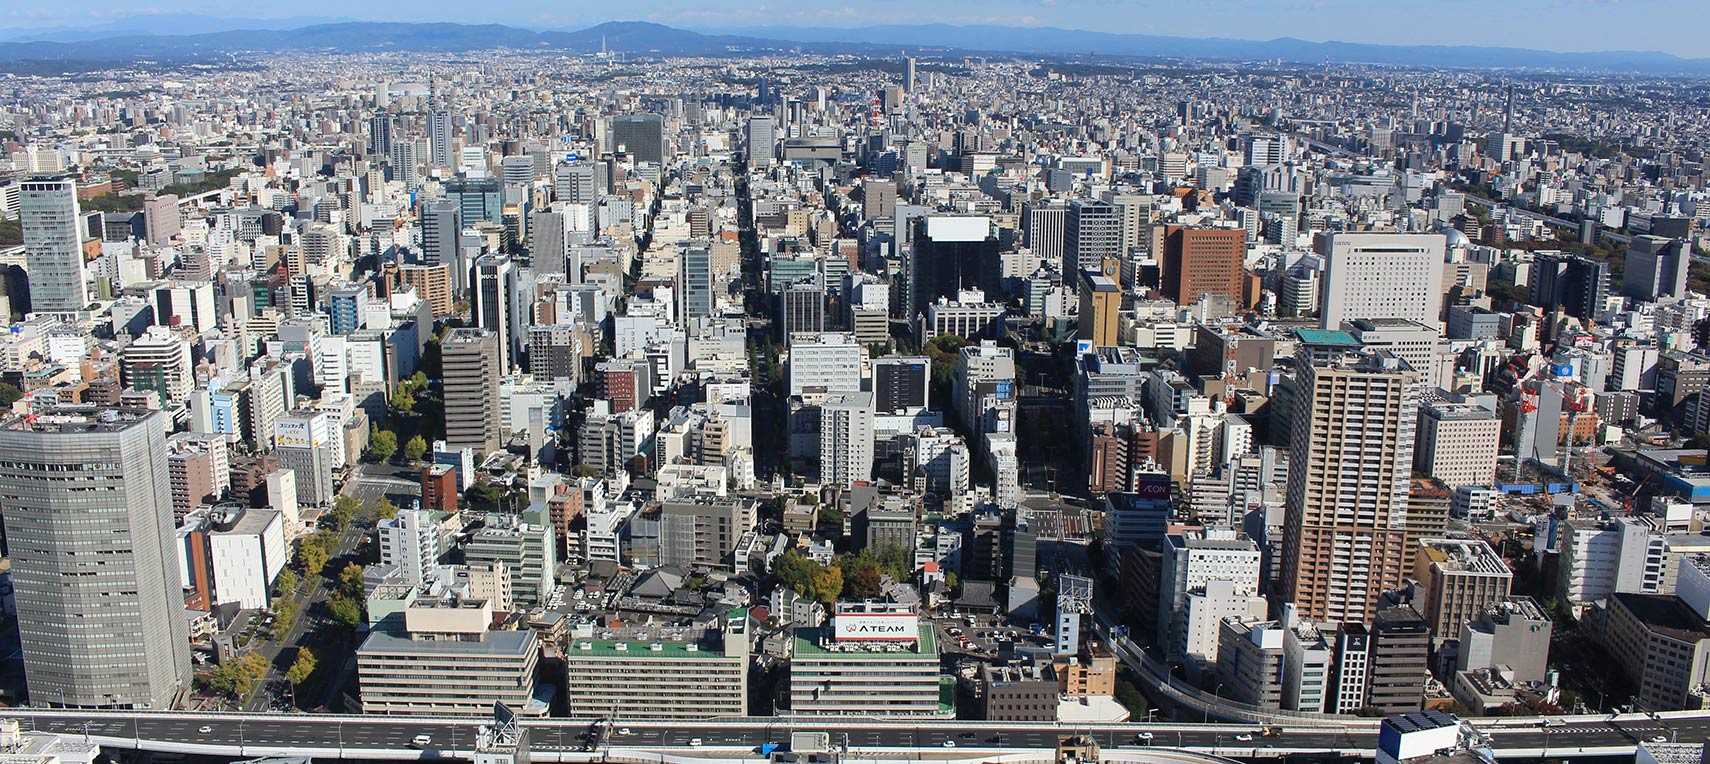 View of Nagoya, the largest city in the Chūbu region of Japan